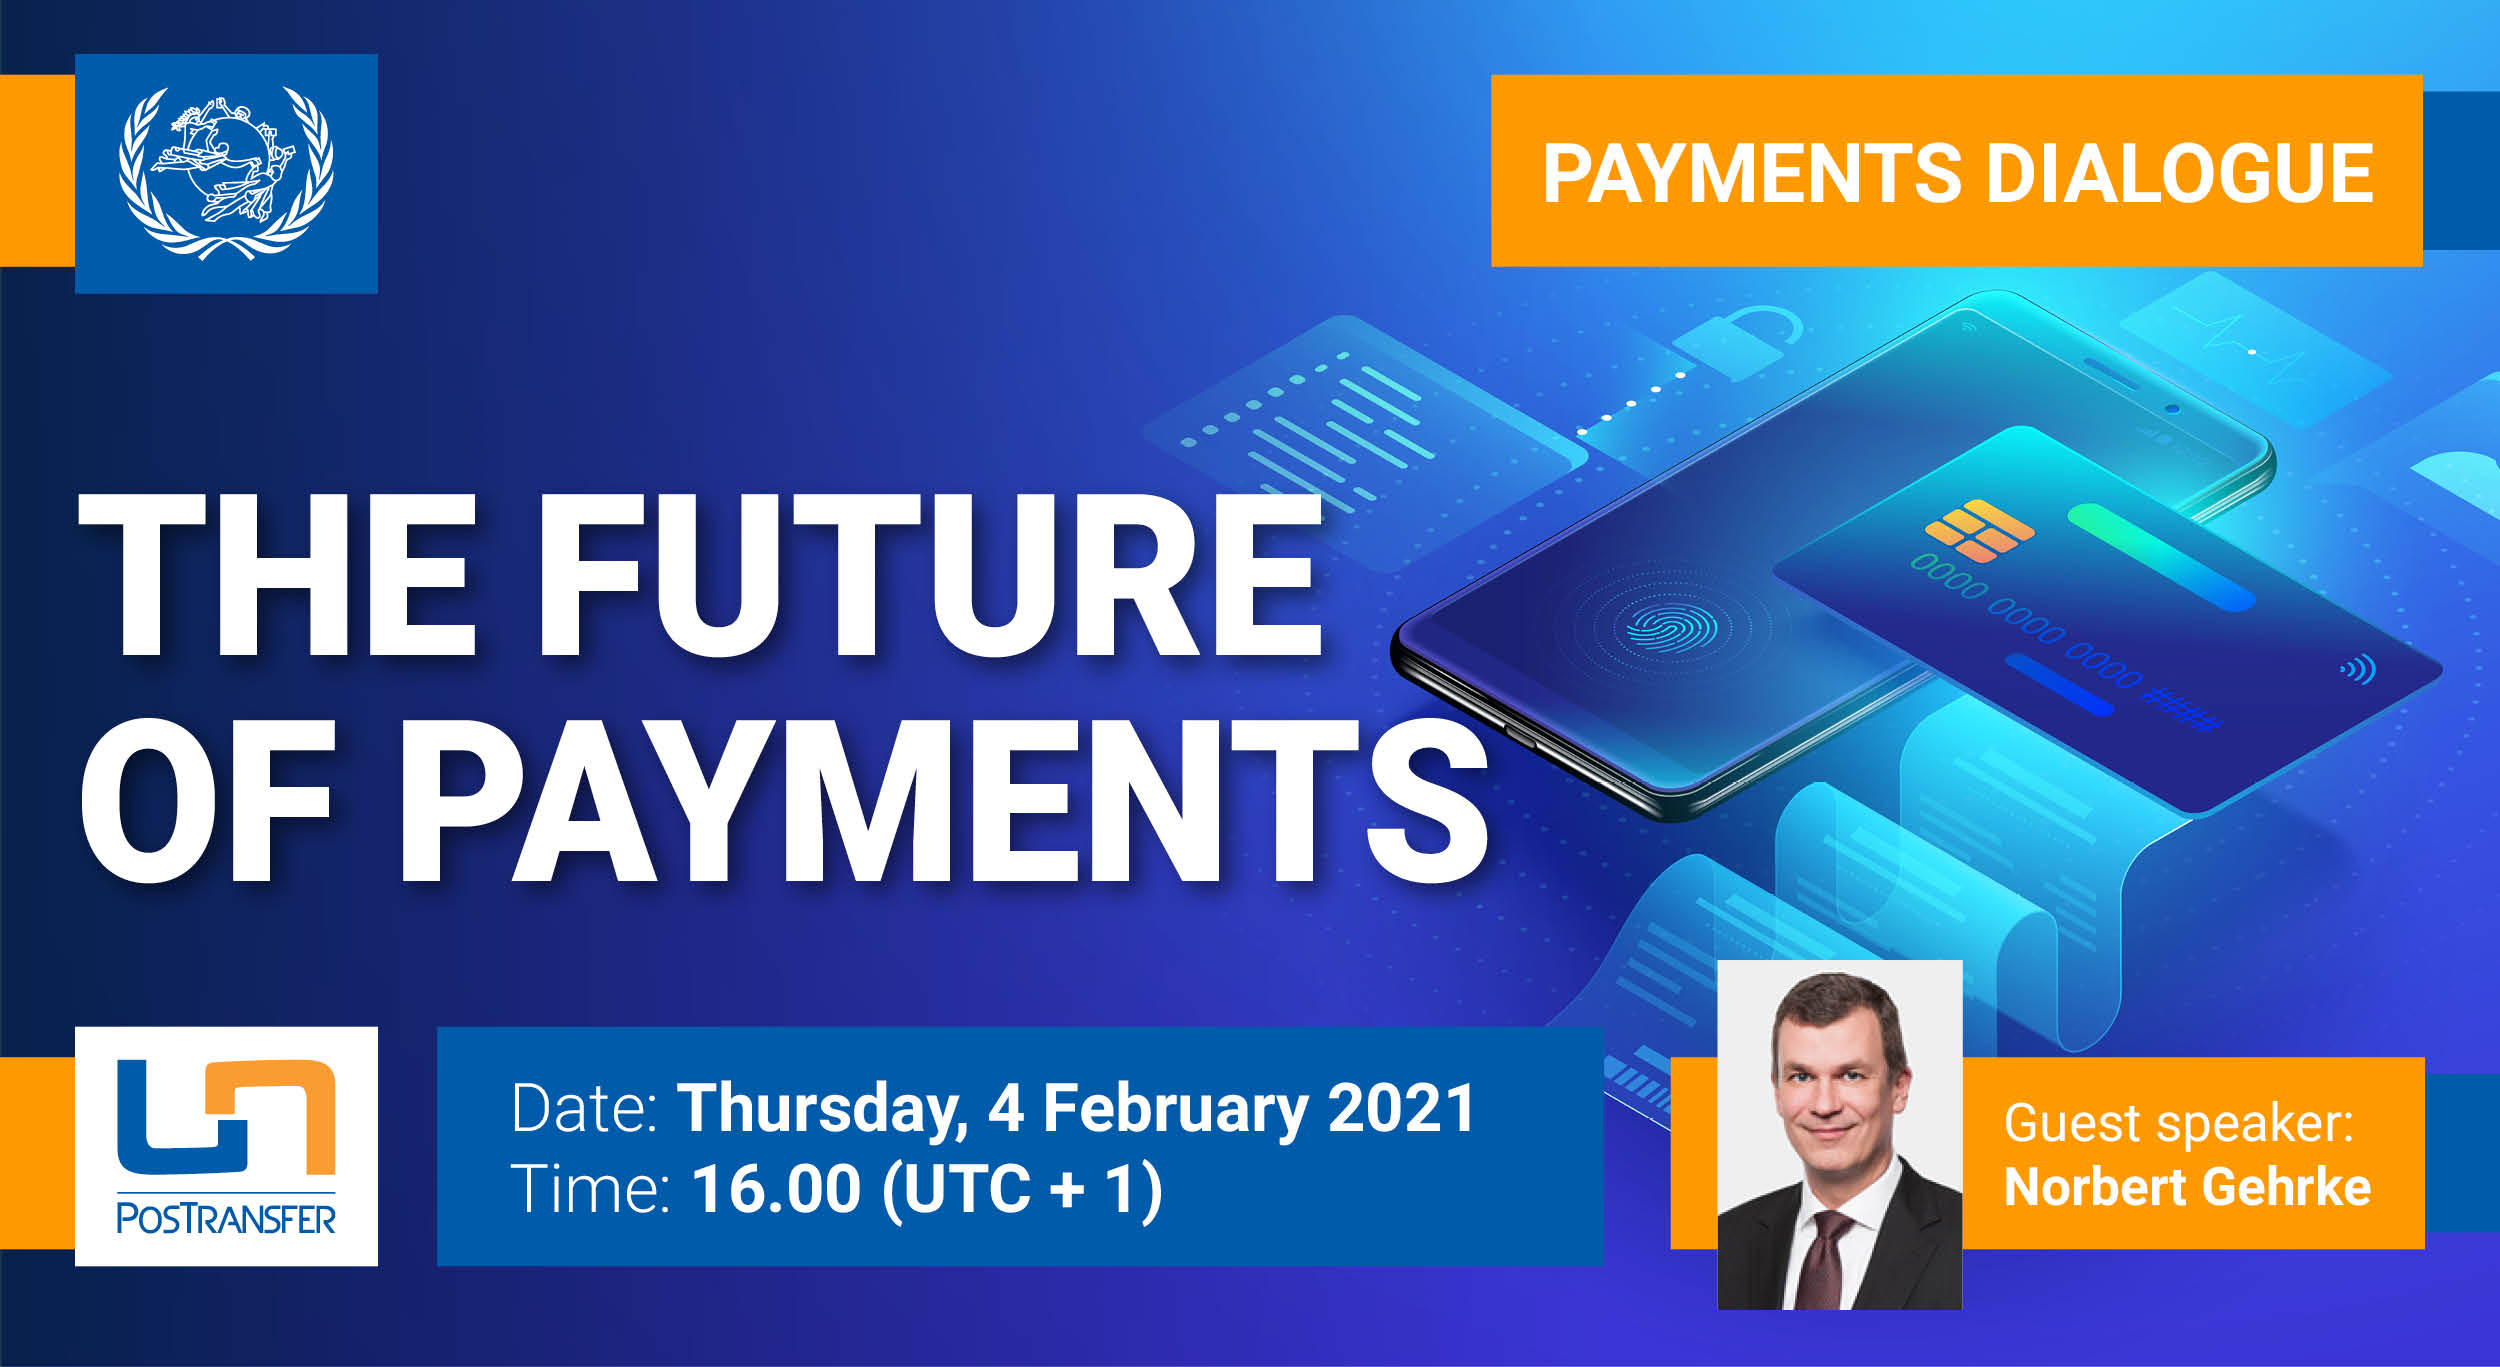 The future of payments